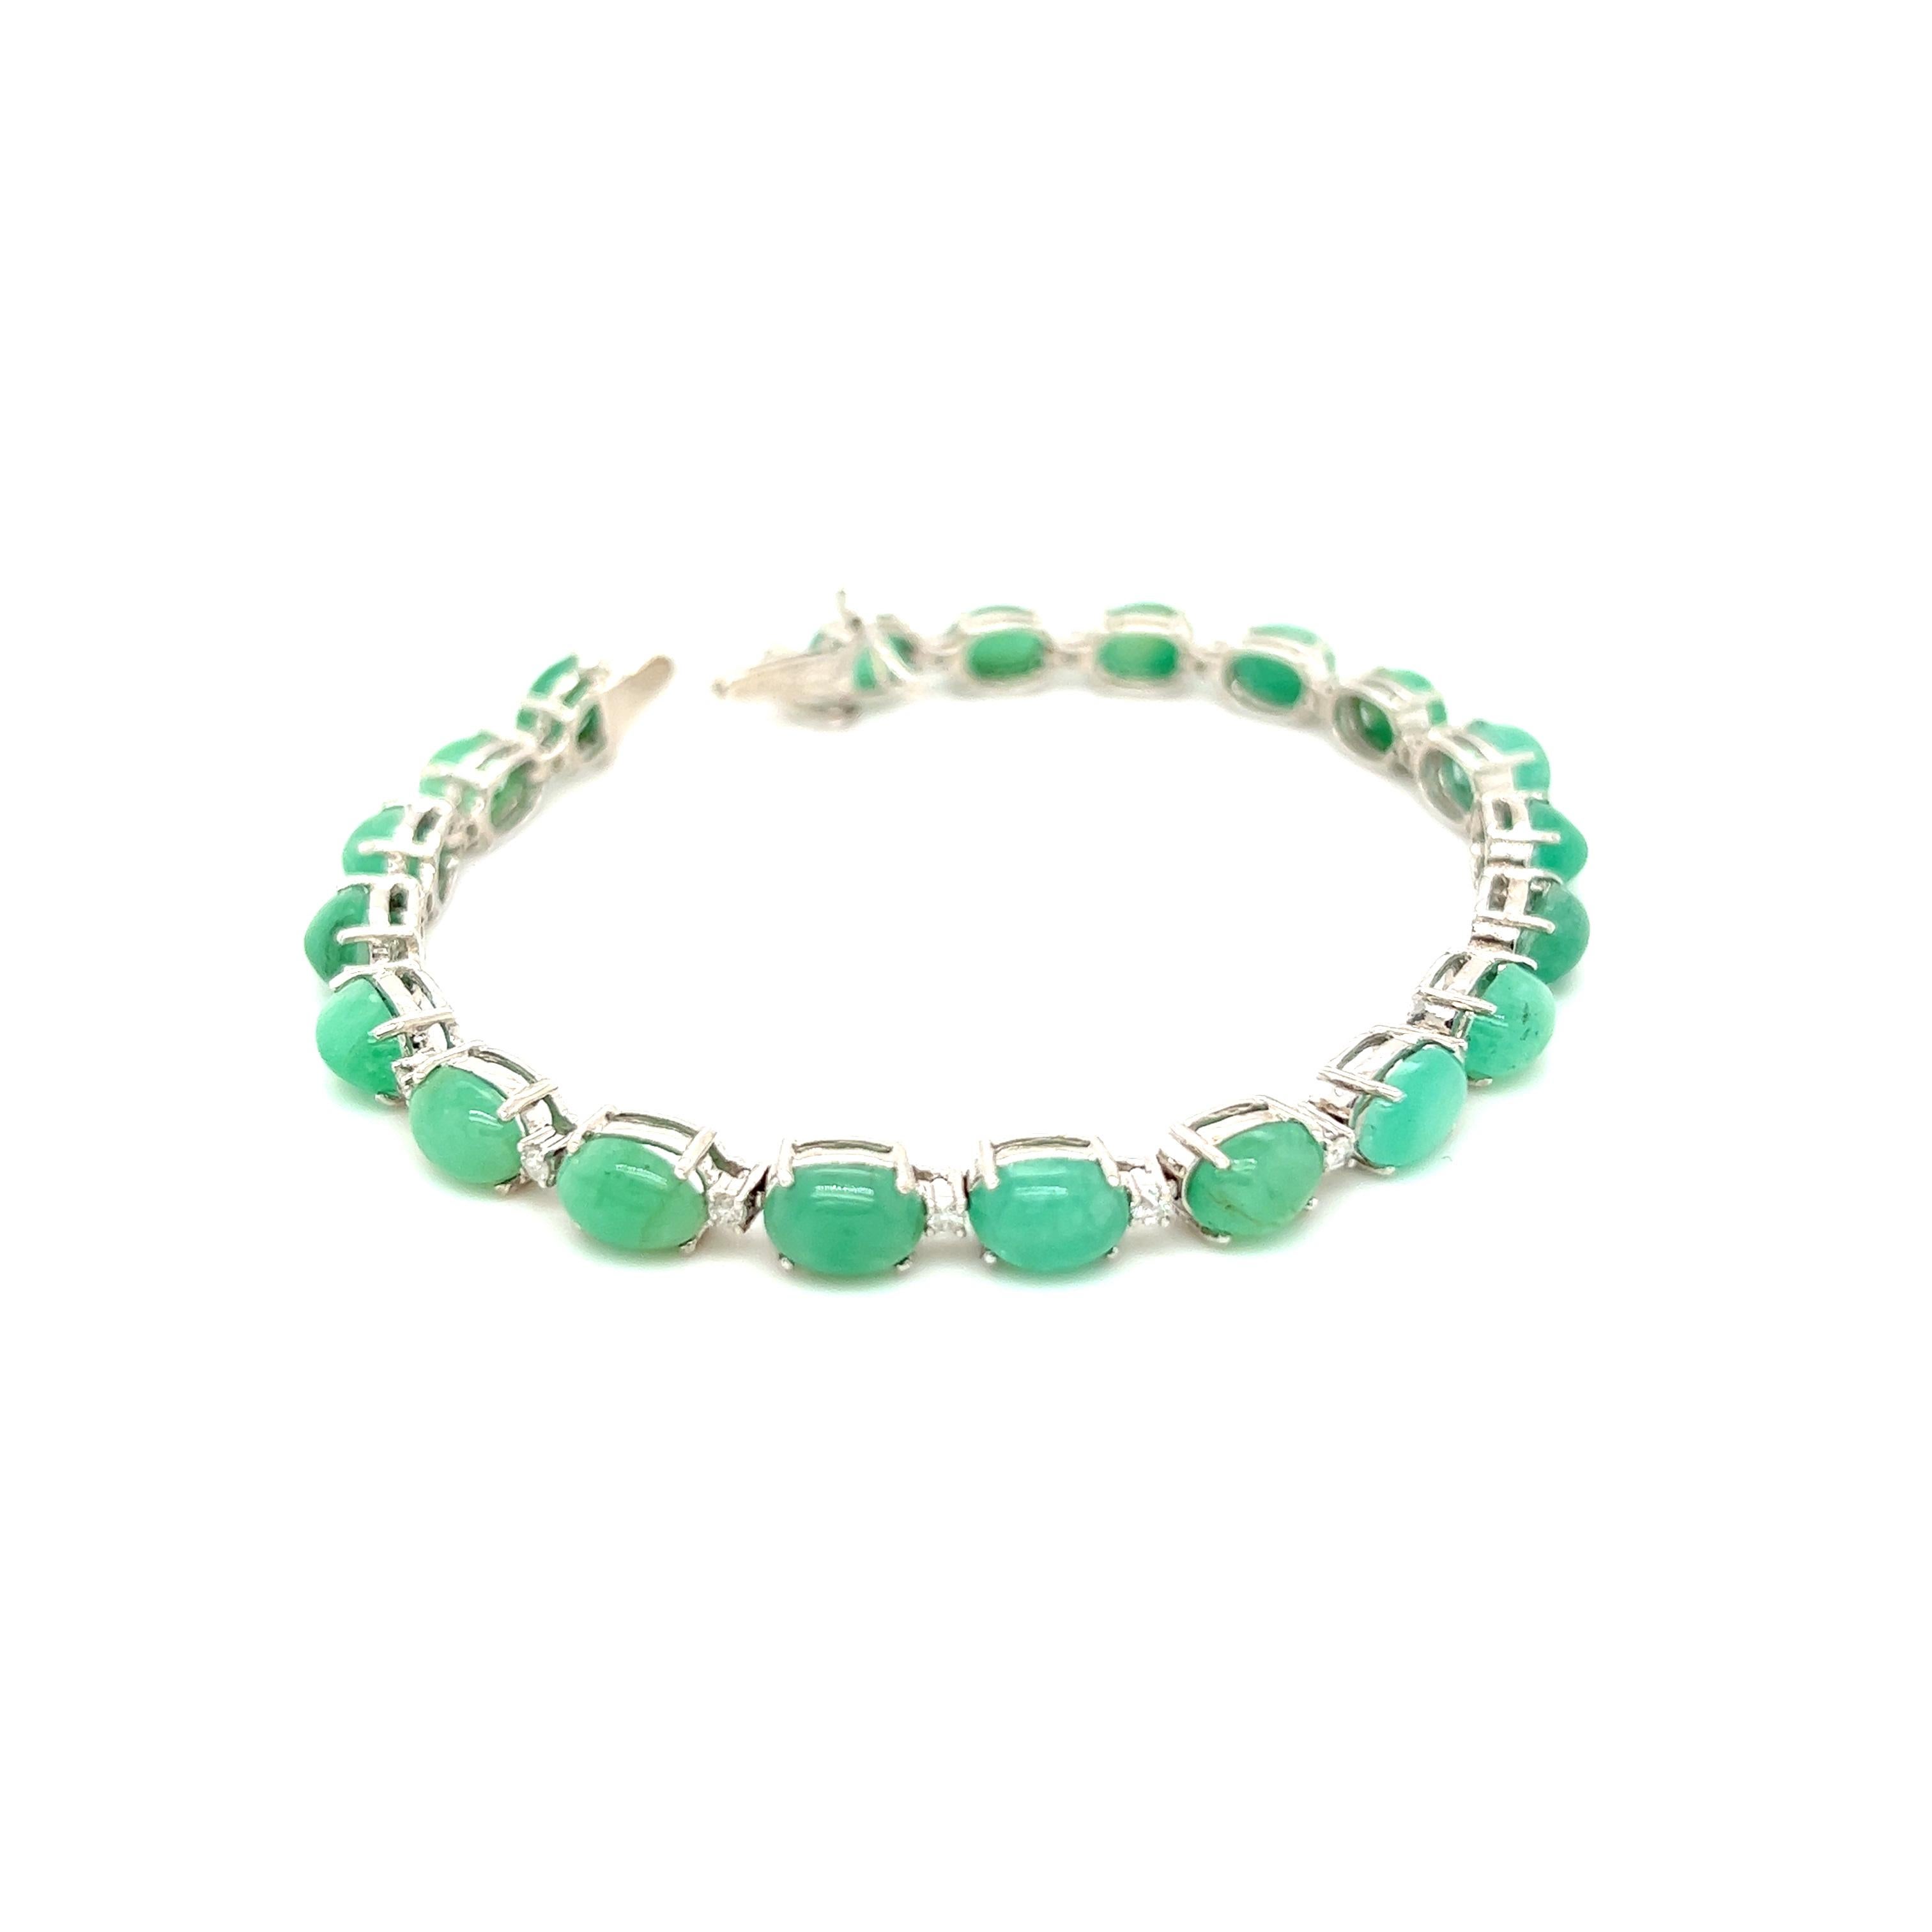  This statement bracelet is the ultimate accessory. It combines a classic, modern look with the romance of emeralds and diamonds. With 0.40ct of round-cut diamonds and 17.30ct of emeralds, this bracelet is sure to catch the eye of all who see it.
